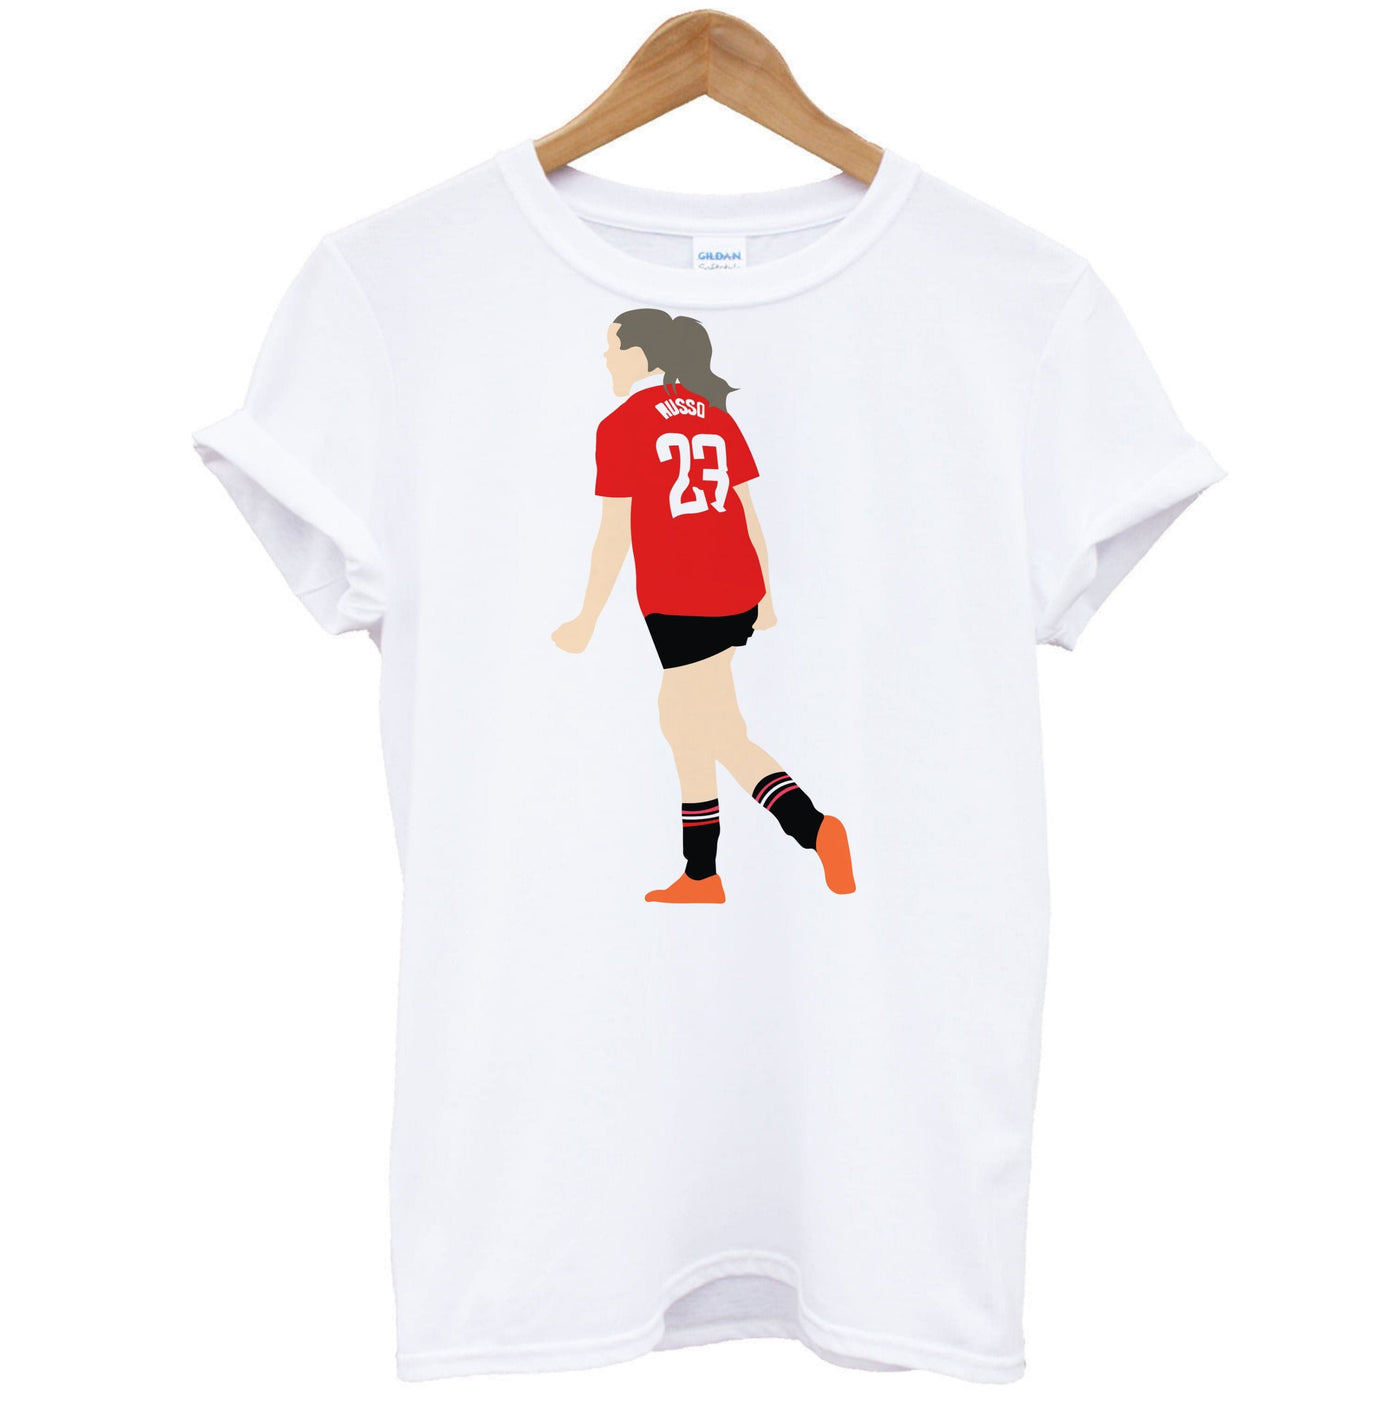 Alessia Russo - Womens World Cup T-Shirt